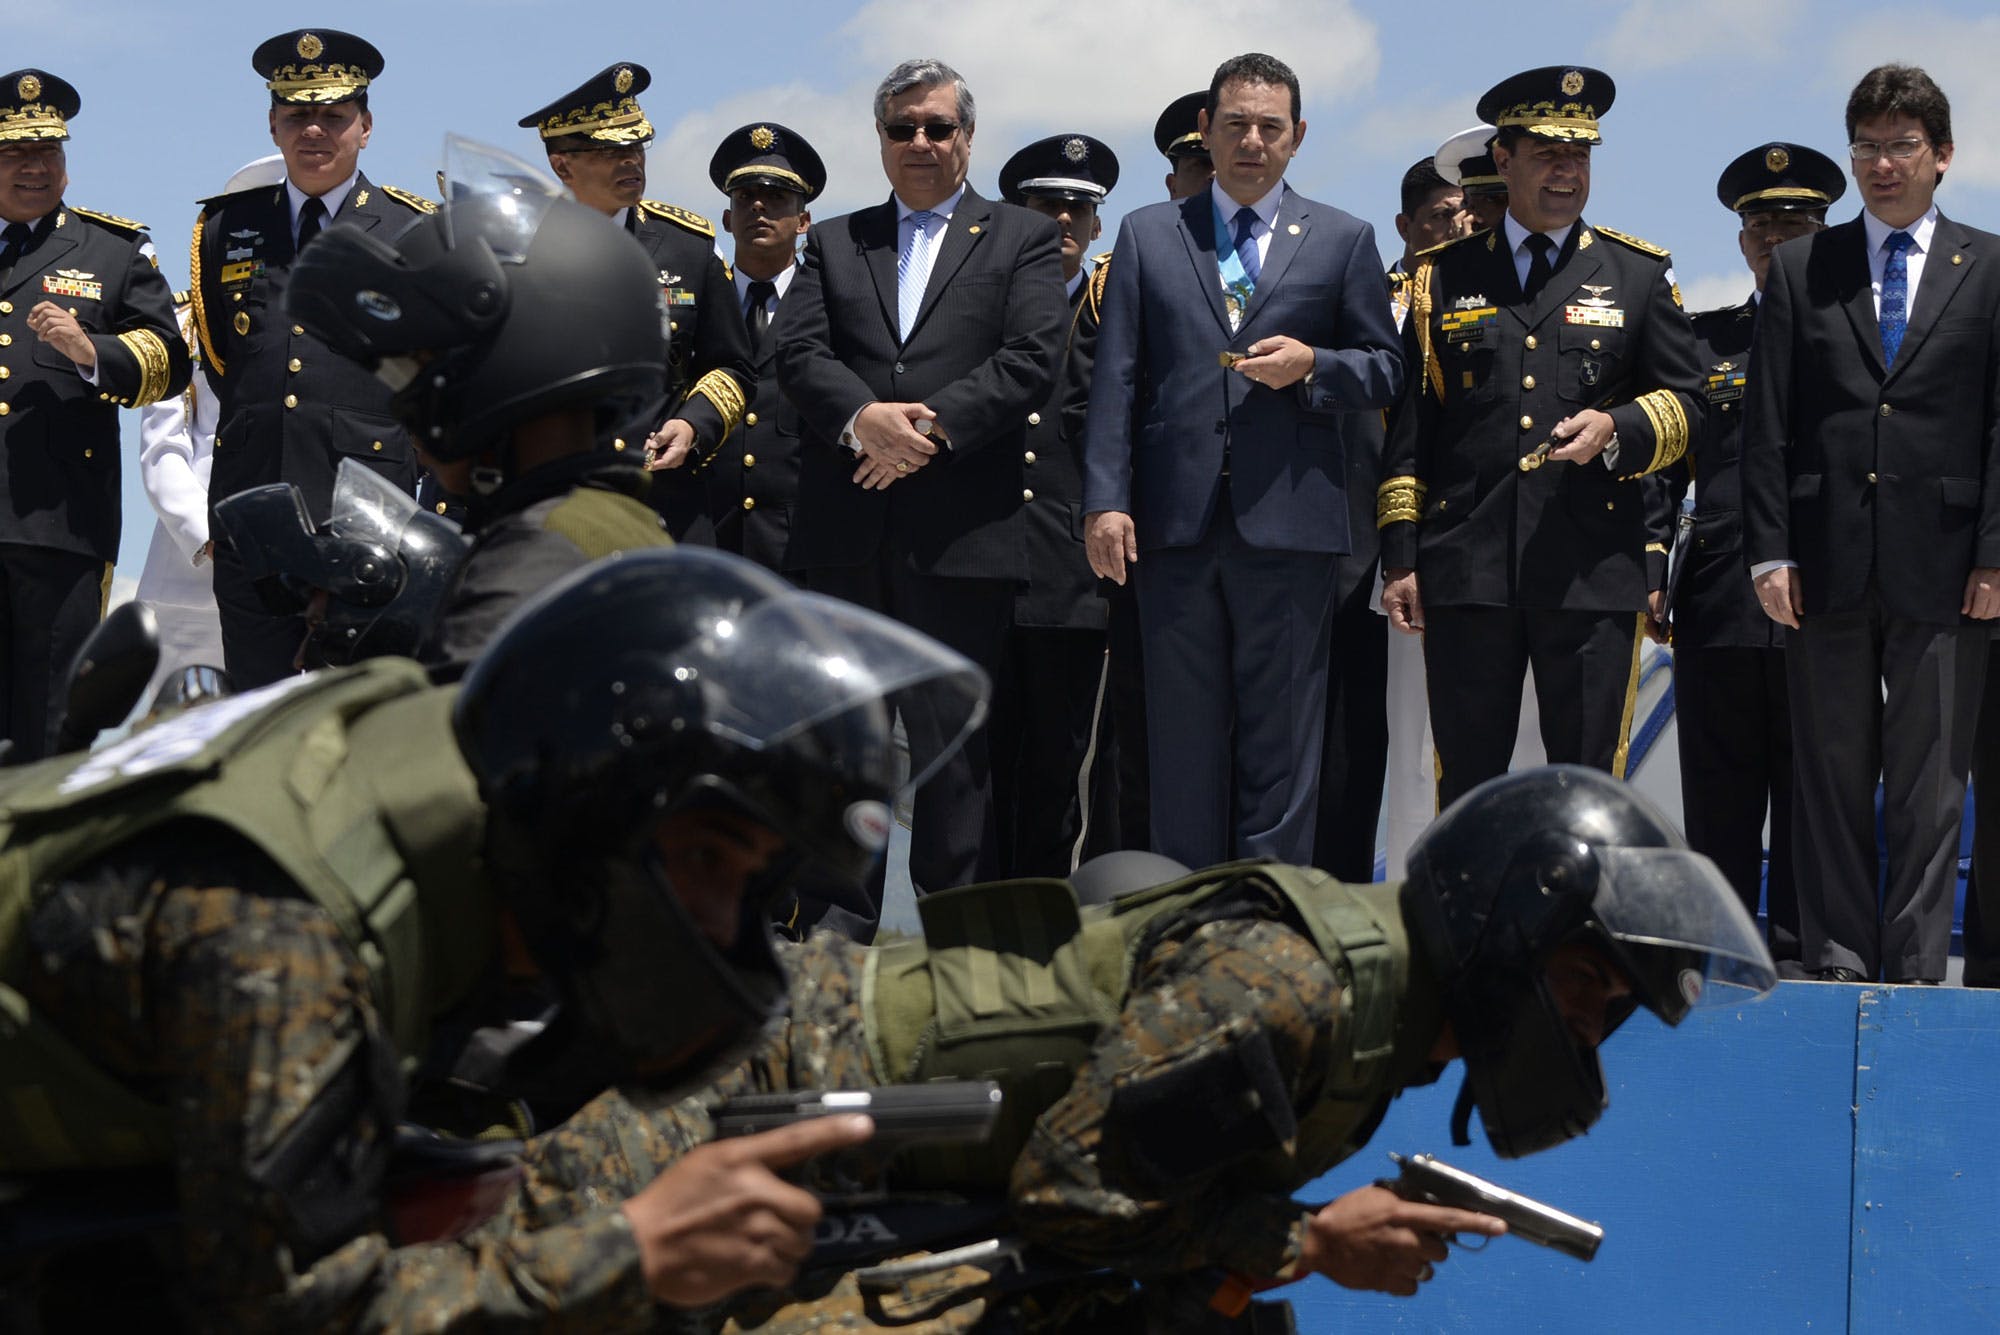 Guatemalan President Jimmy Morales (3-R) attends a military parade during the celebration of the Army Day in Guatemala City, on July 3, 2016. / AFP / JOHAN ORDONEZ        (Photo credit should read JOHAN ORDONEZ/AFP/Getty Images)